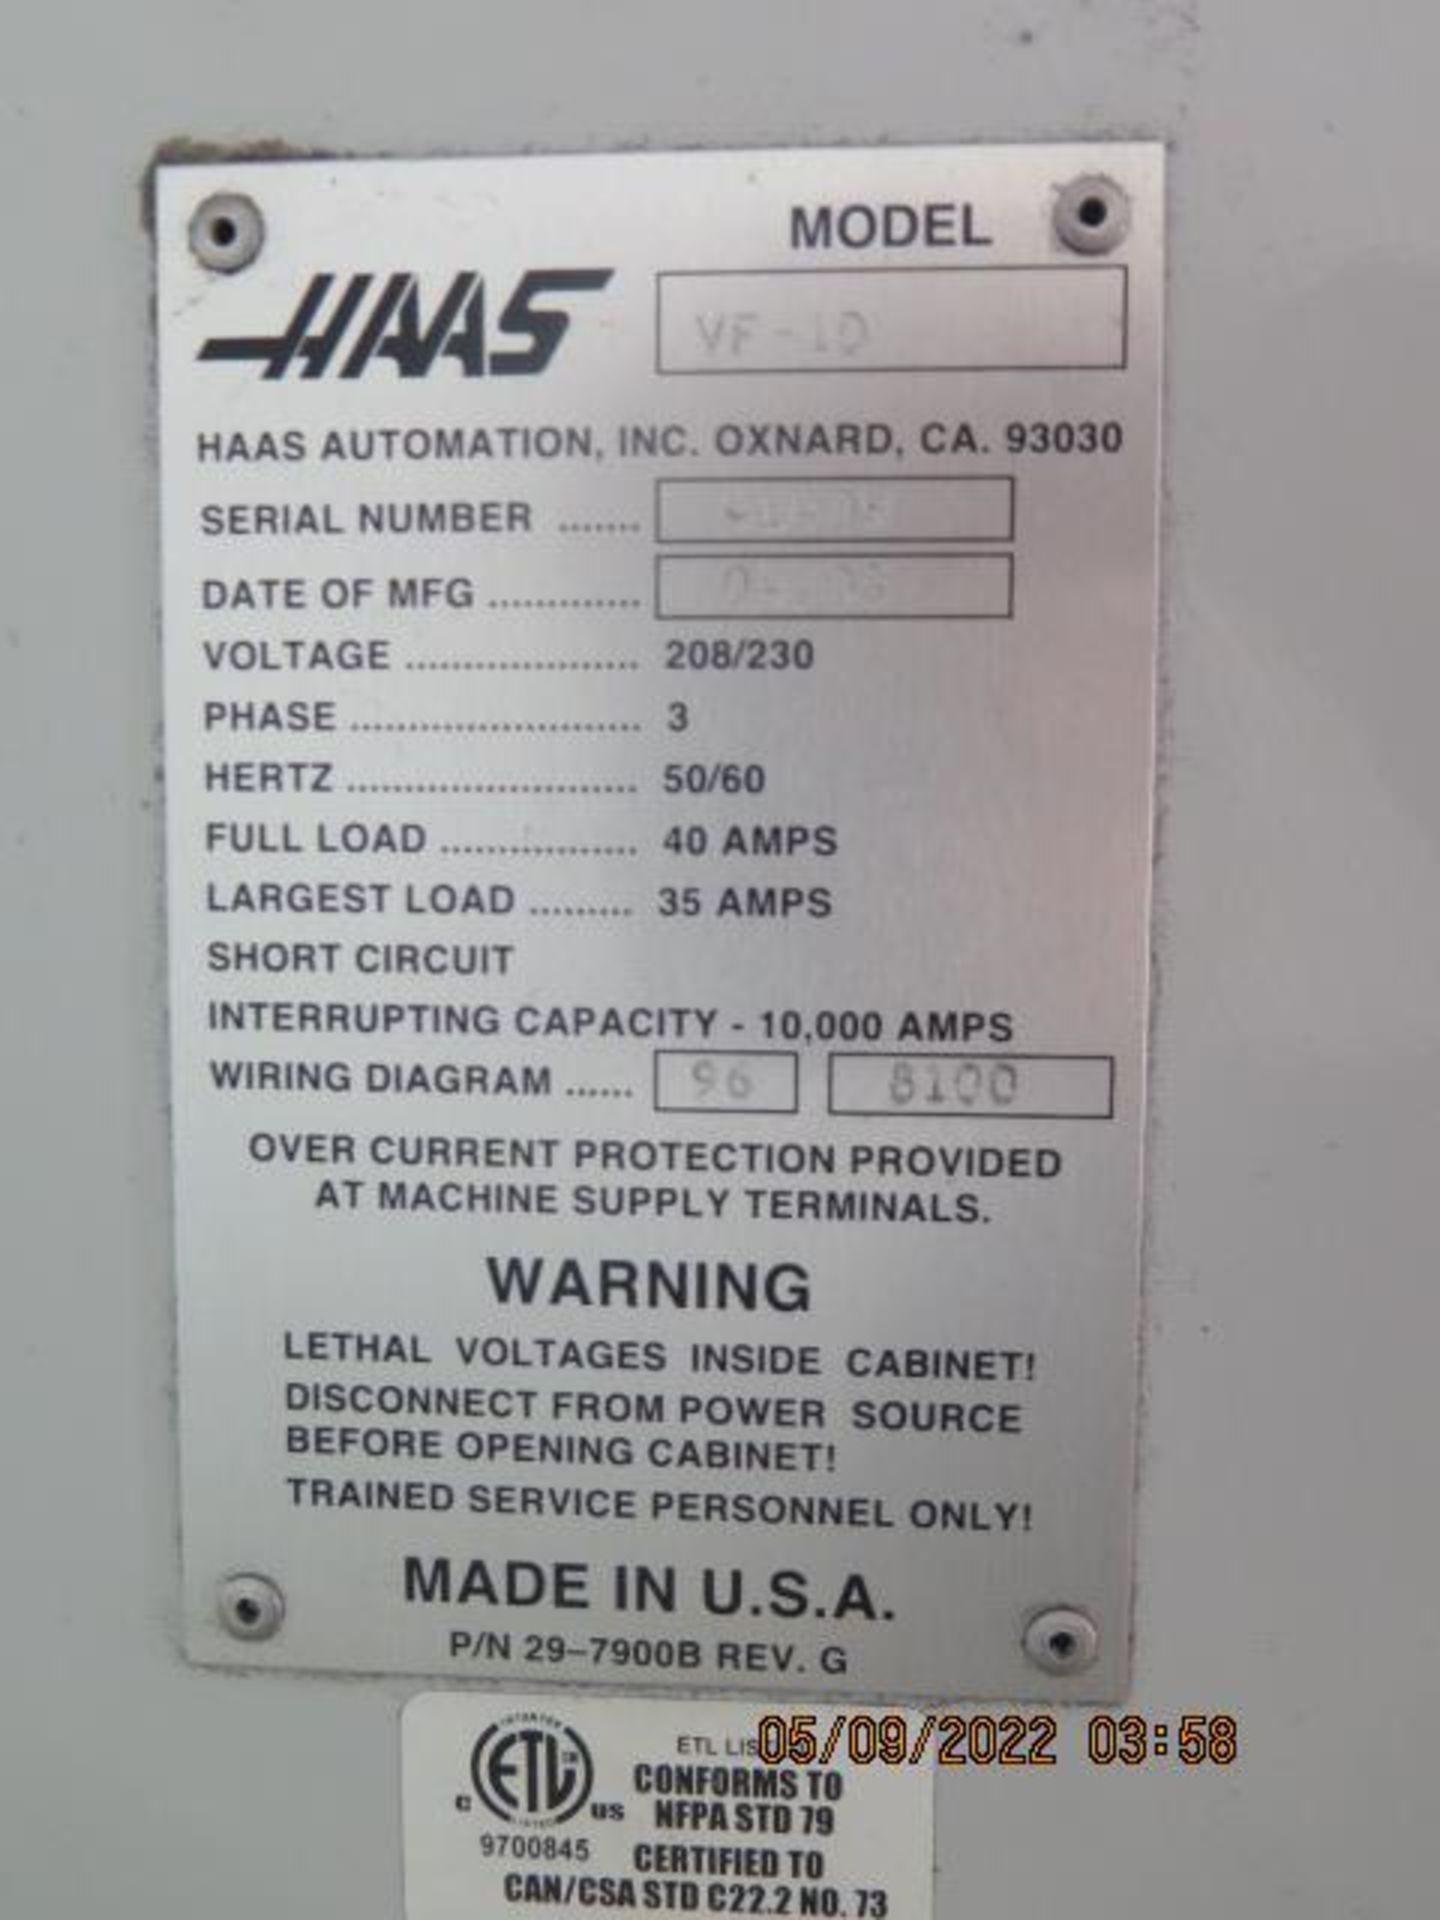 2005 Haas VF-1D CNC VMC s/n 41409 w/ Haas Controls, Hand Wheel, 24-Station ATC, SOLD AS IS - Image 16 of 16